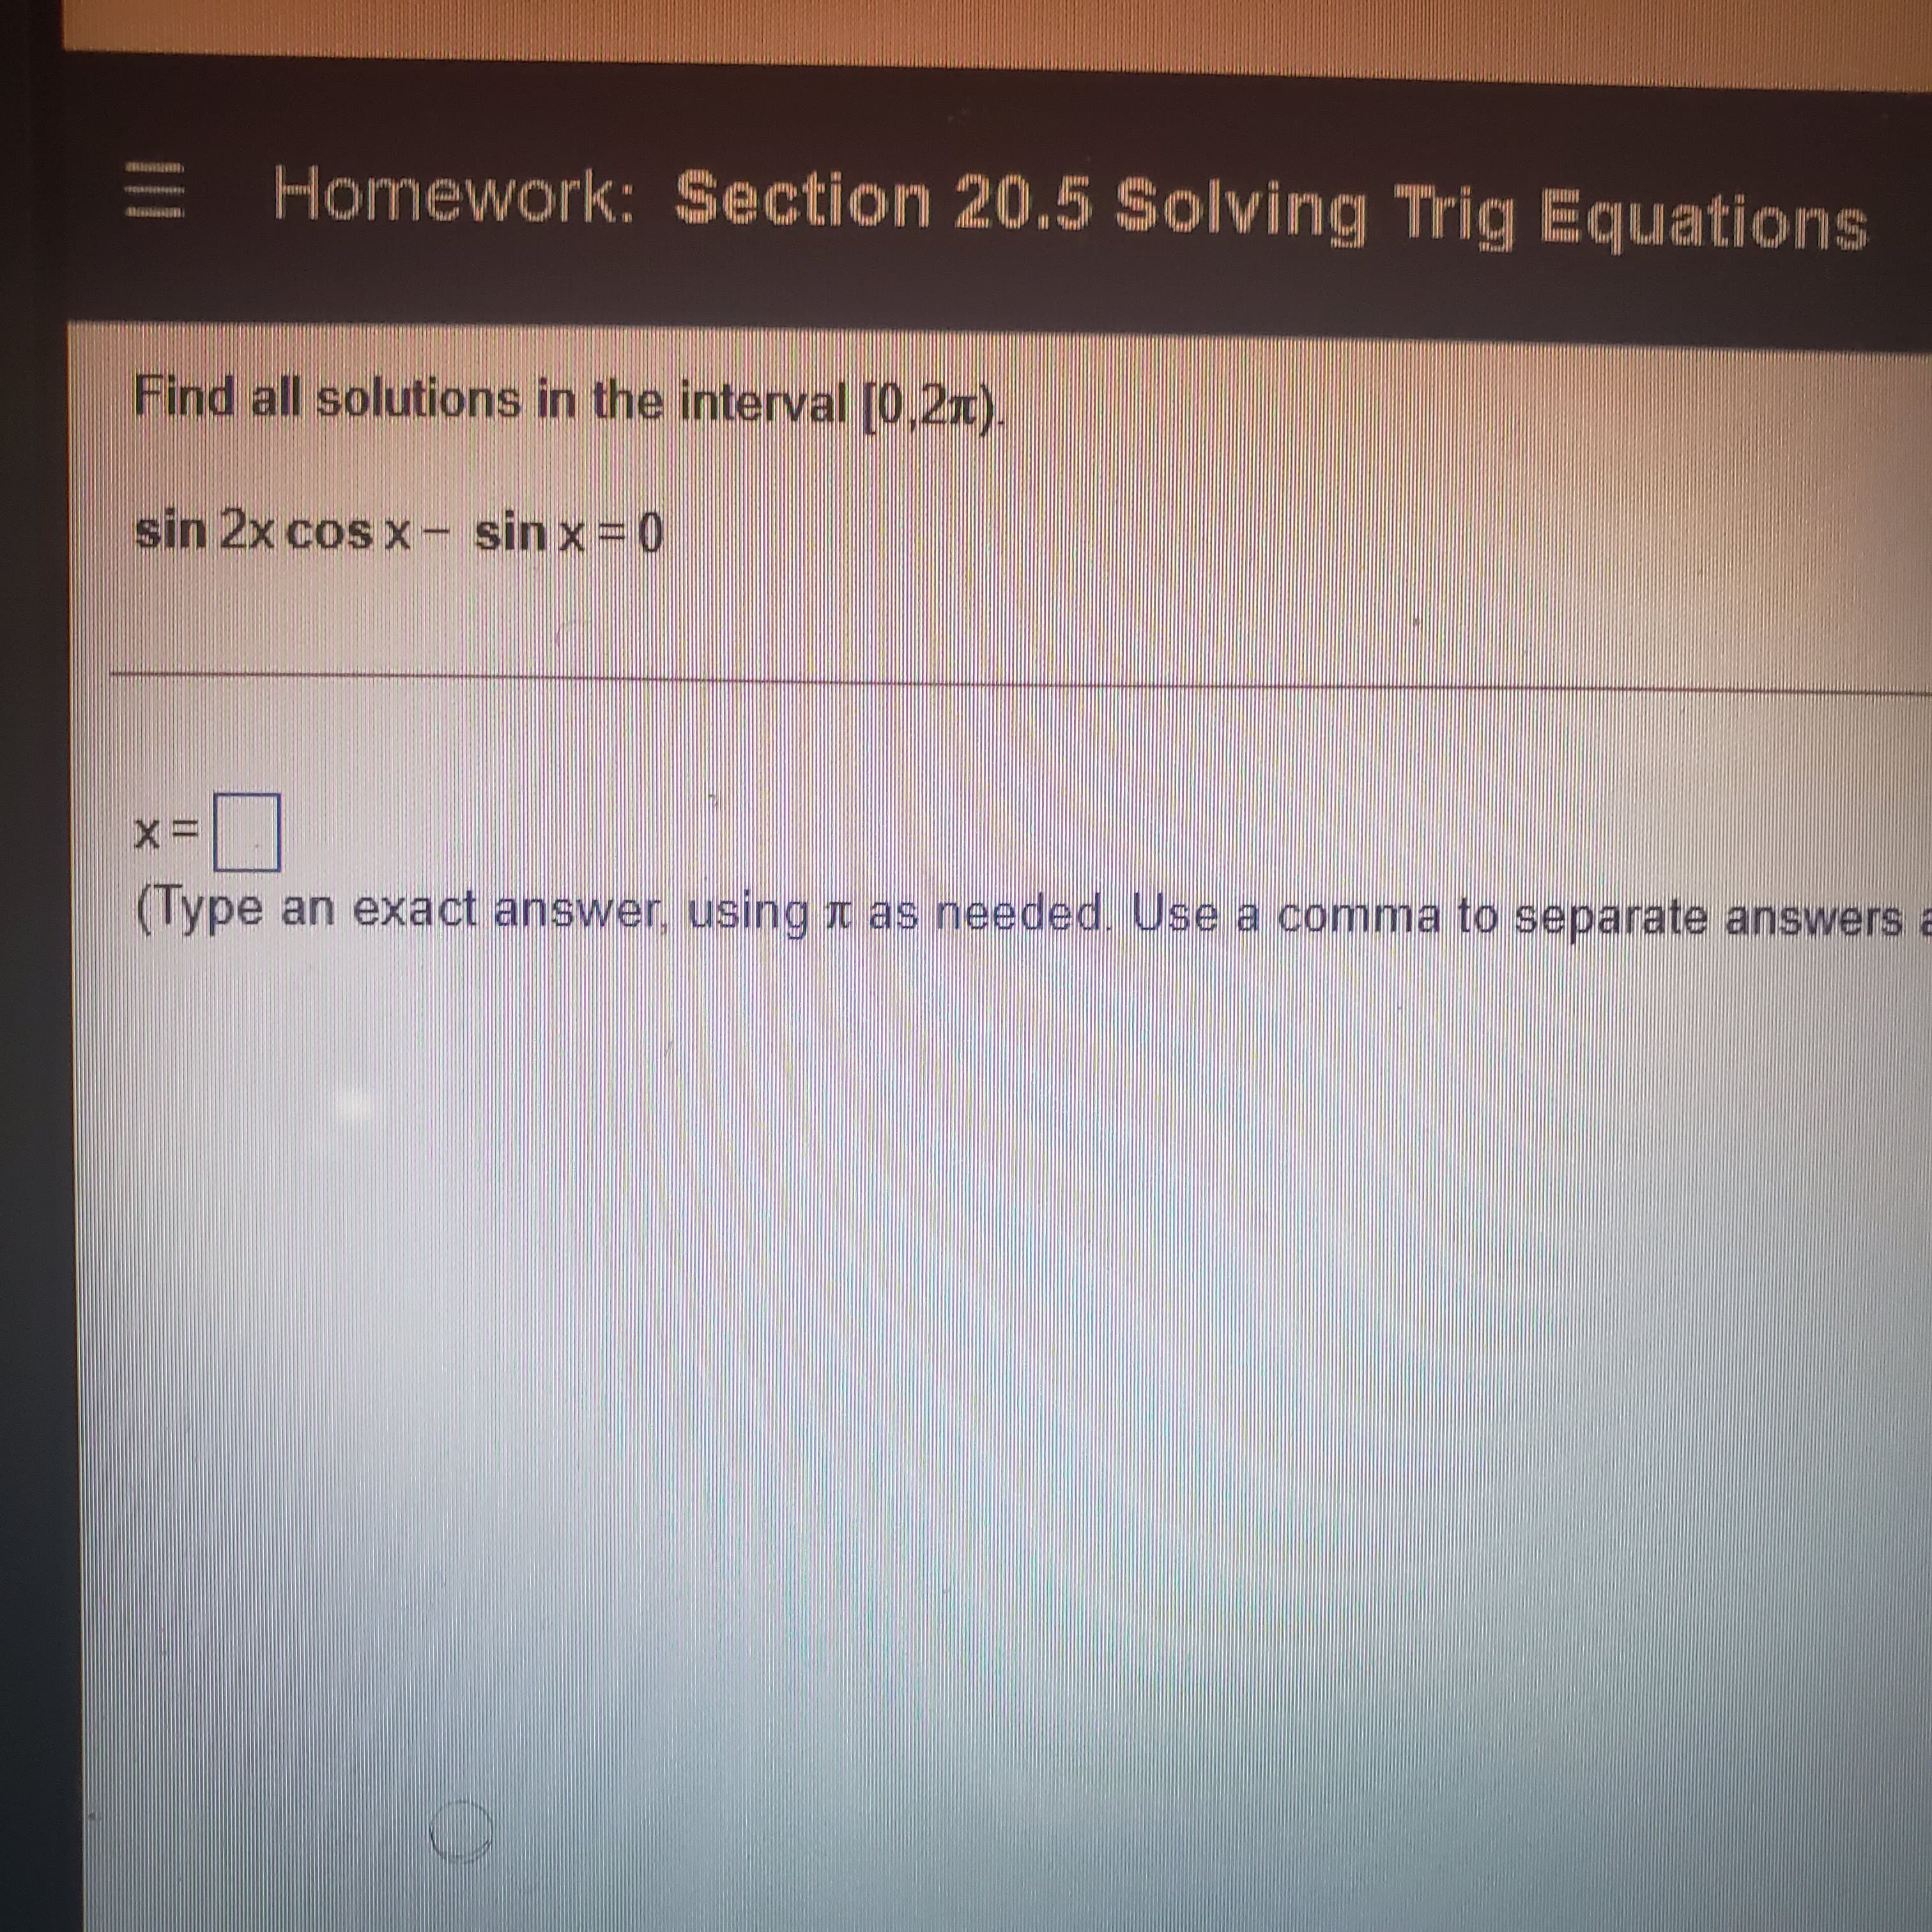 E Homework: Section 20.5 Solving Trig Equations
Find all solutions in the interval [0,2x).
sin 2x cos x- sin x=0
(Type an exact answer, using t as needed. Use a comma to separate answers a
